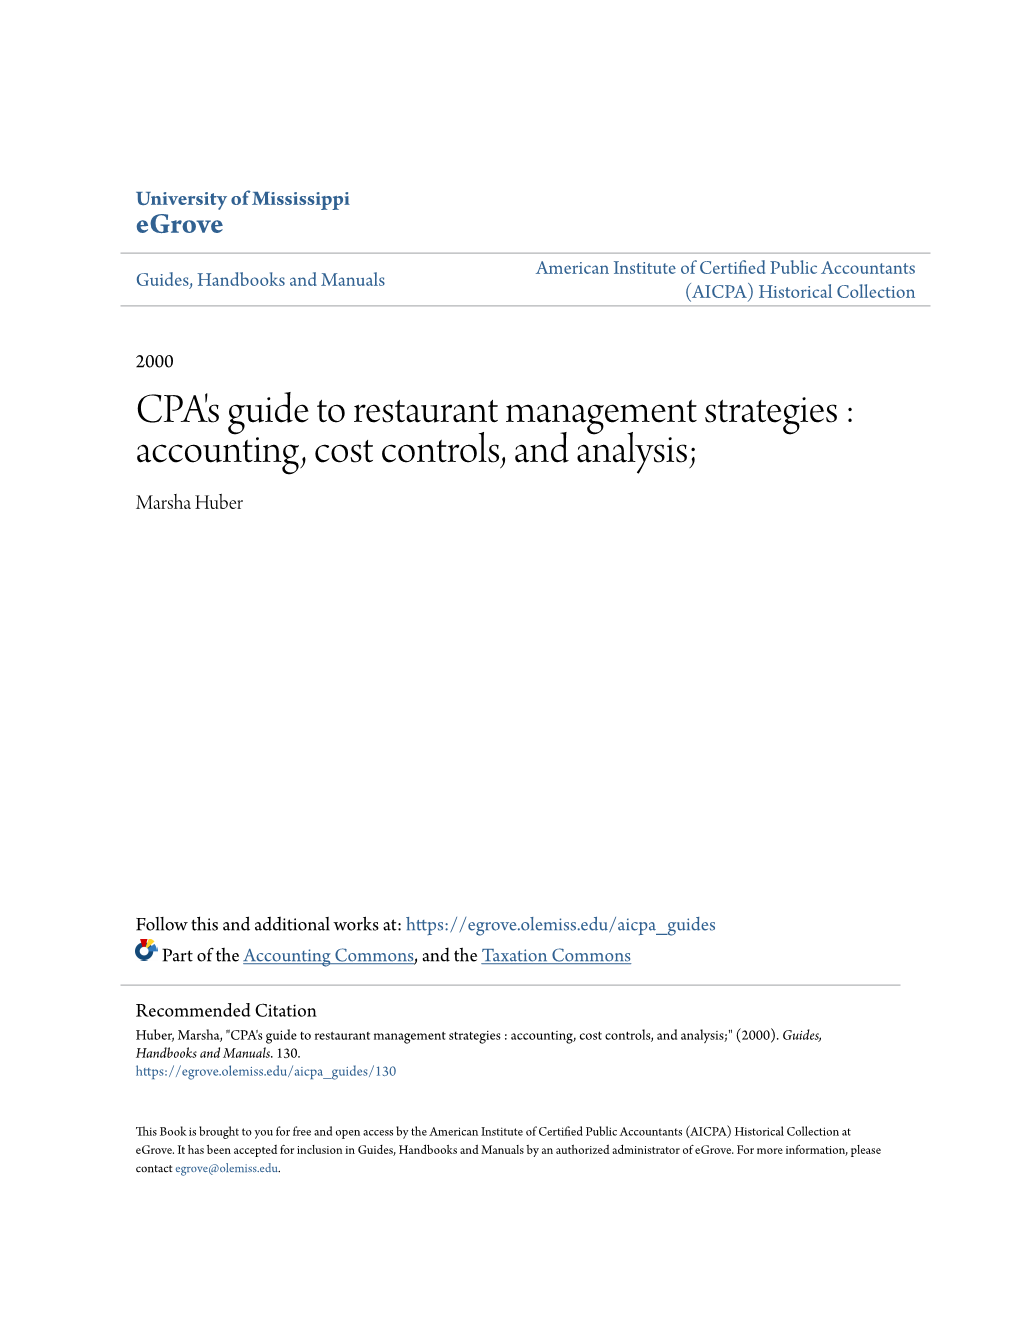 CPA's Guide to Restaurant Management Strategies : Accounting, Cost Controls, and Analysis; Marsha Huber